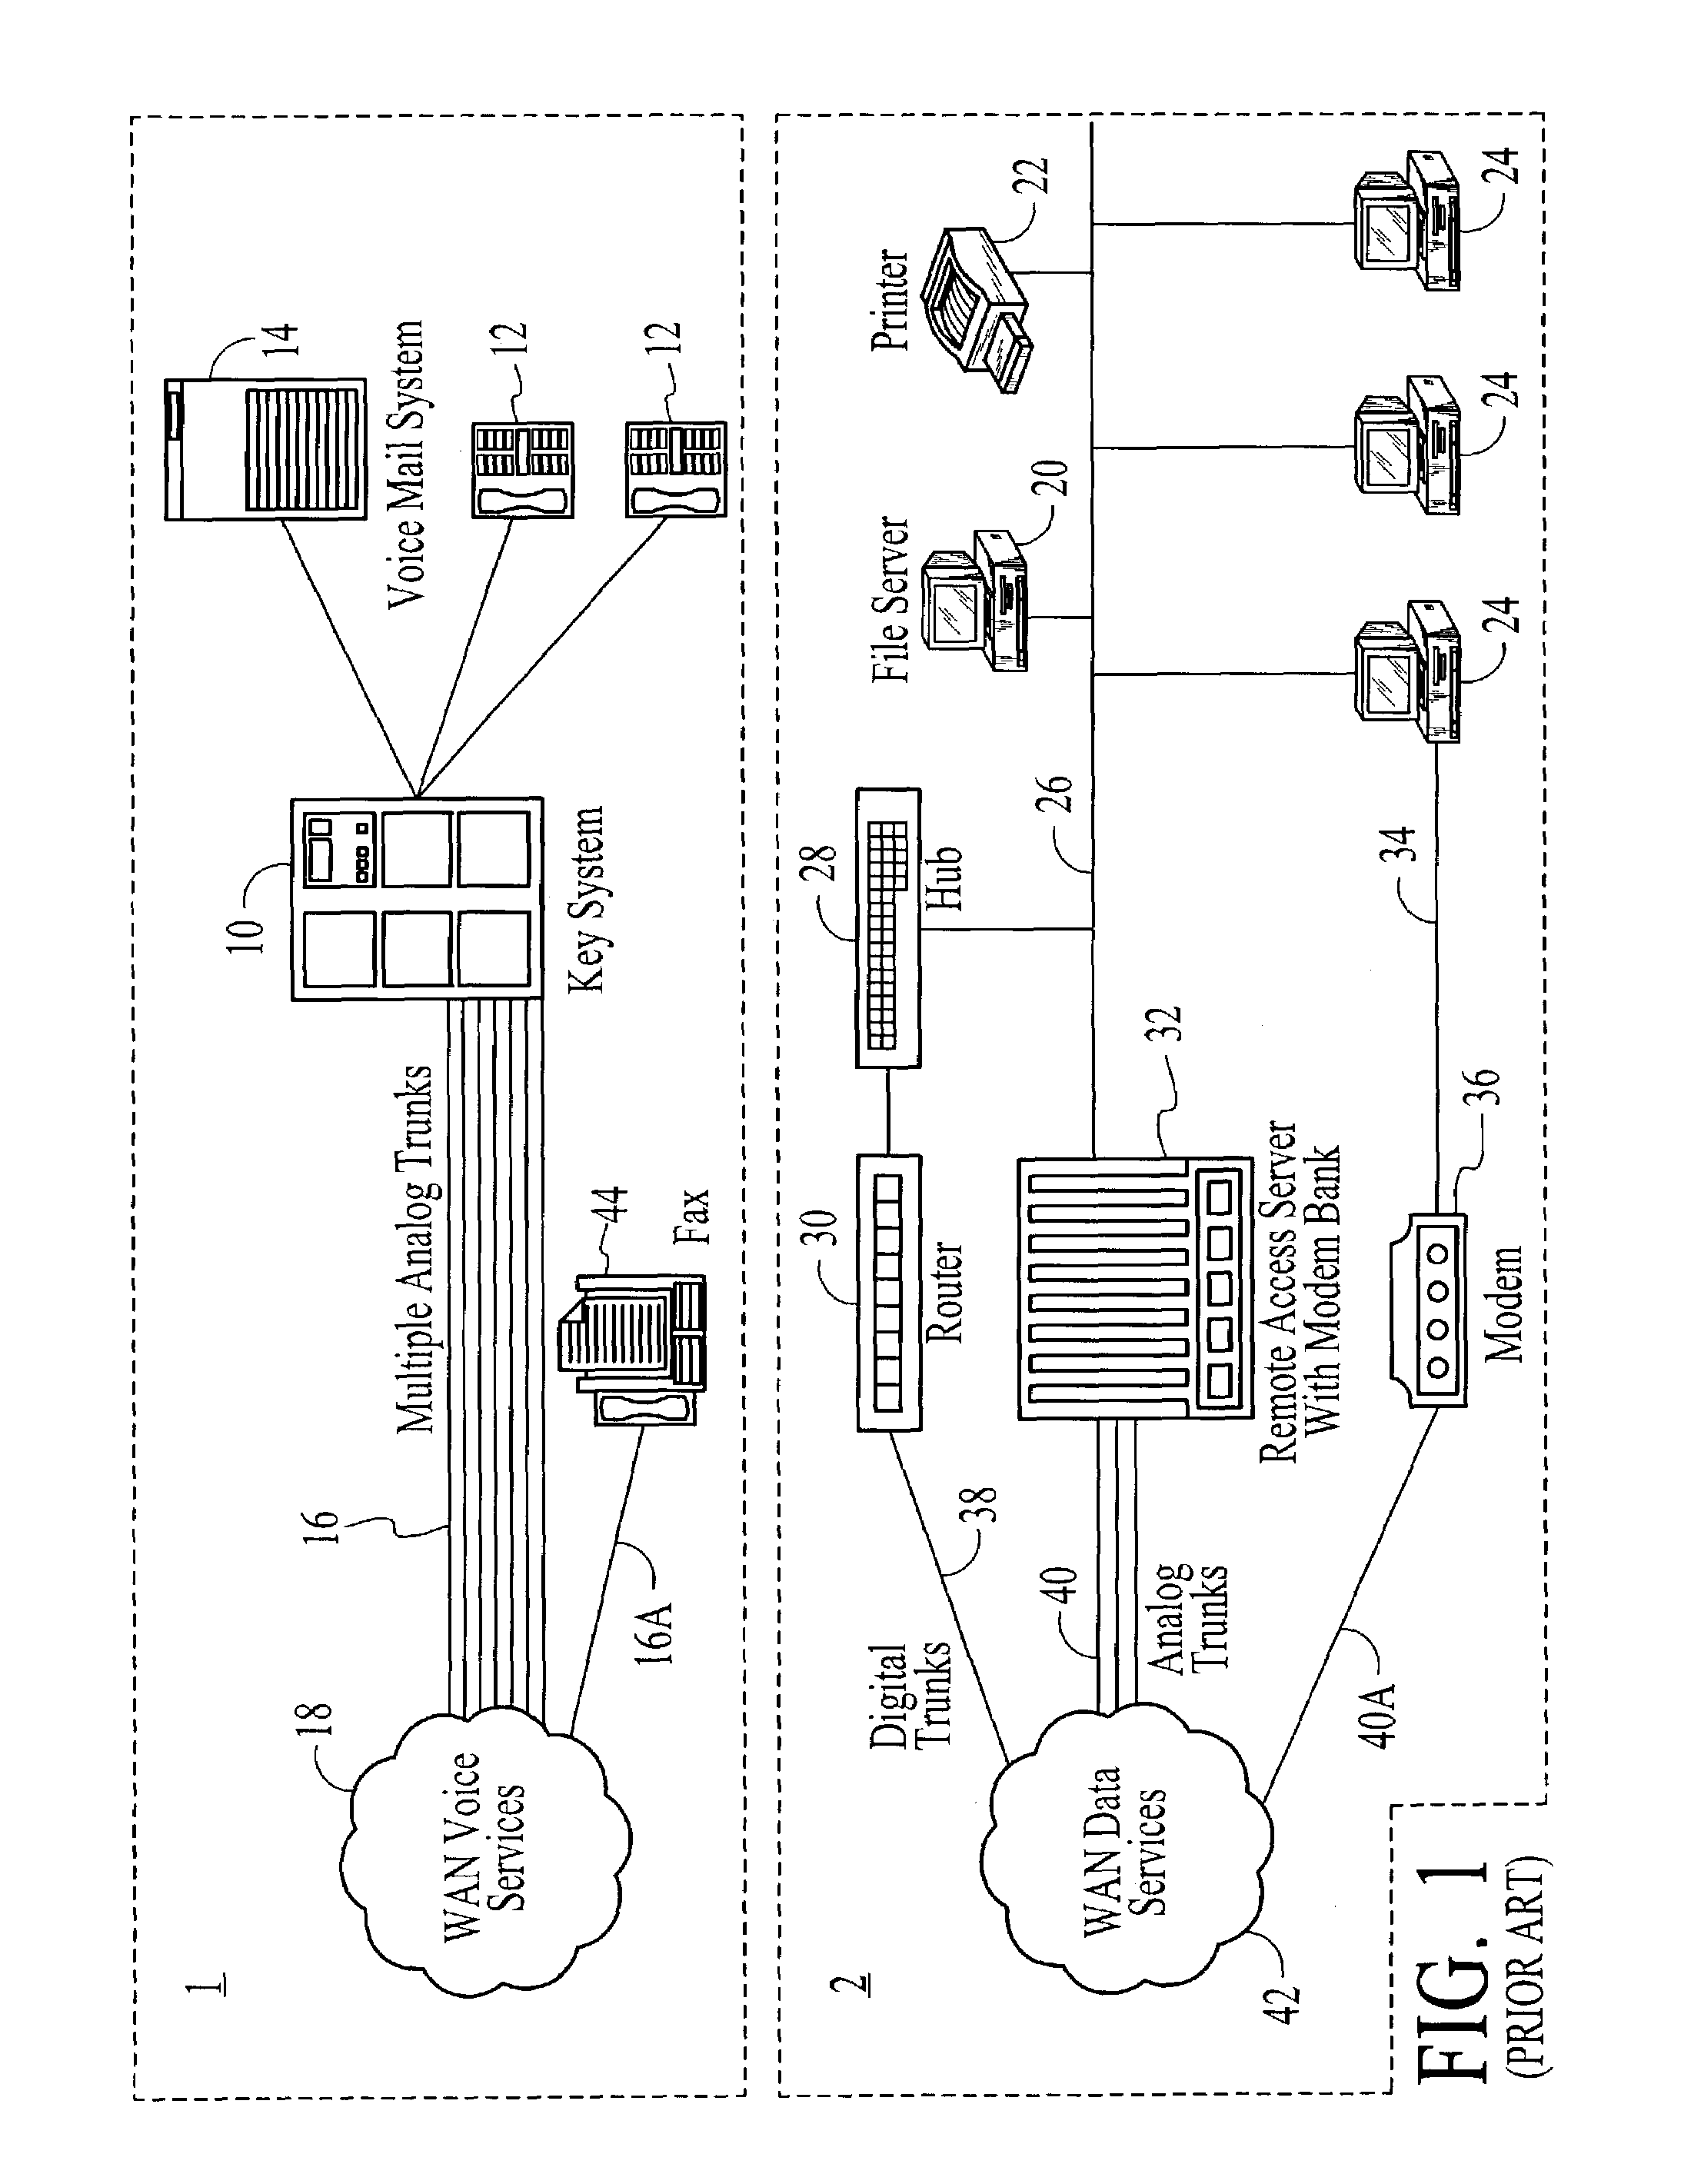 Systems and methods for providing configurable caller ID information